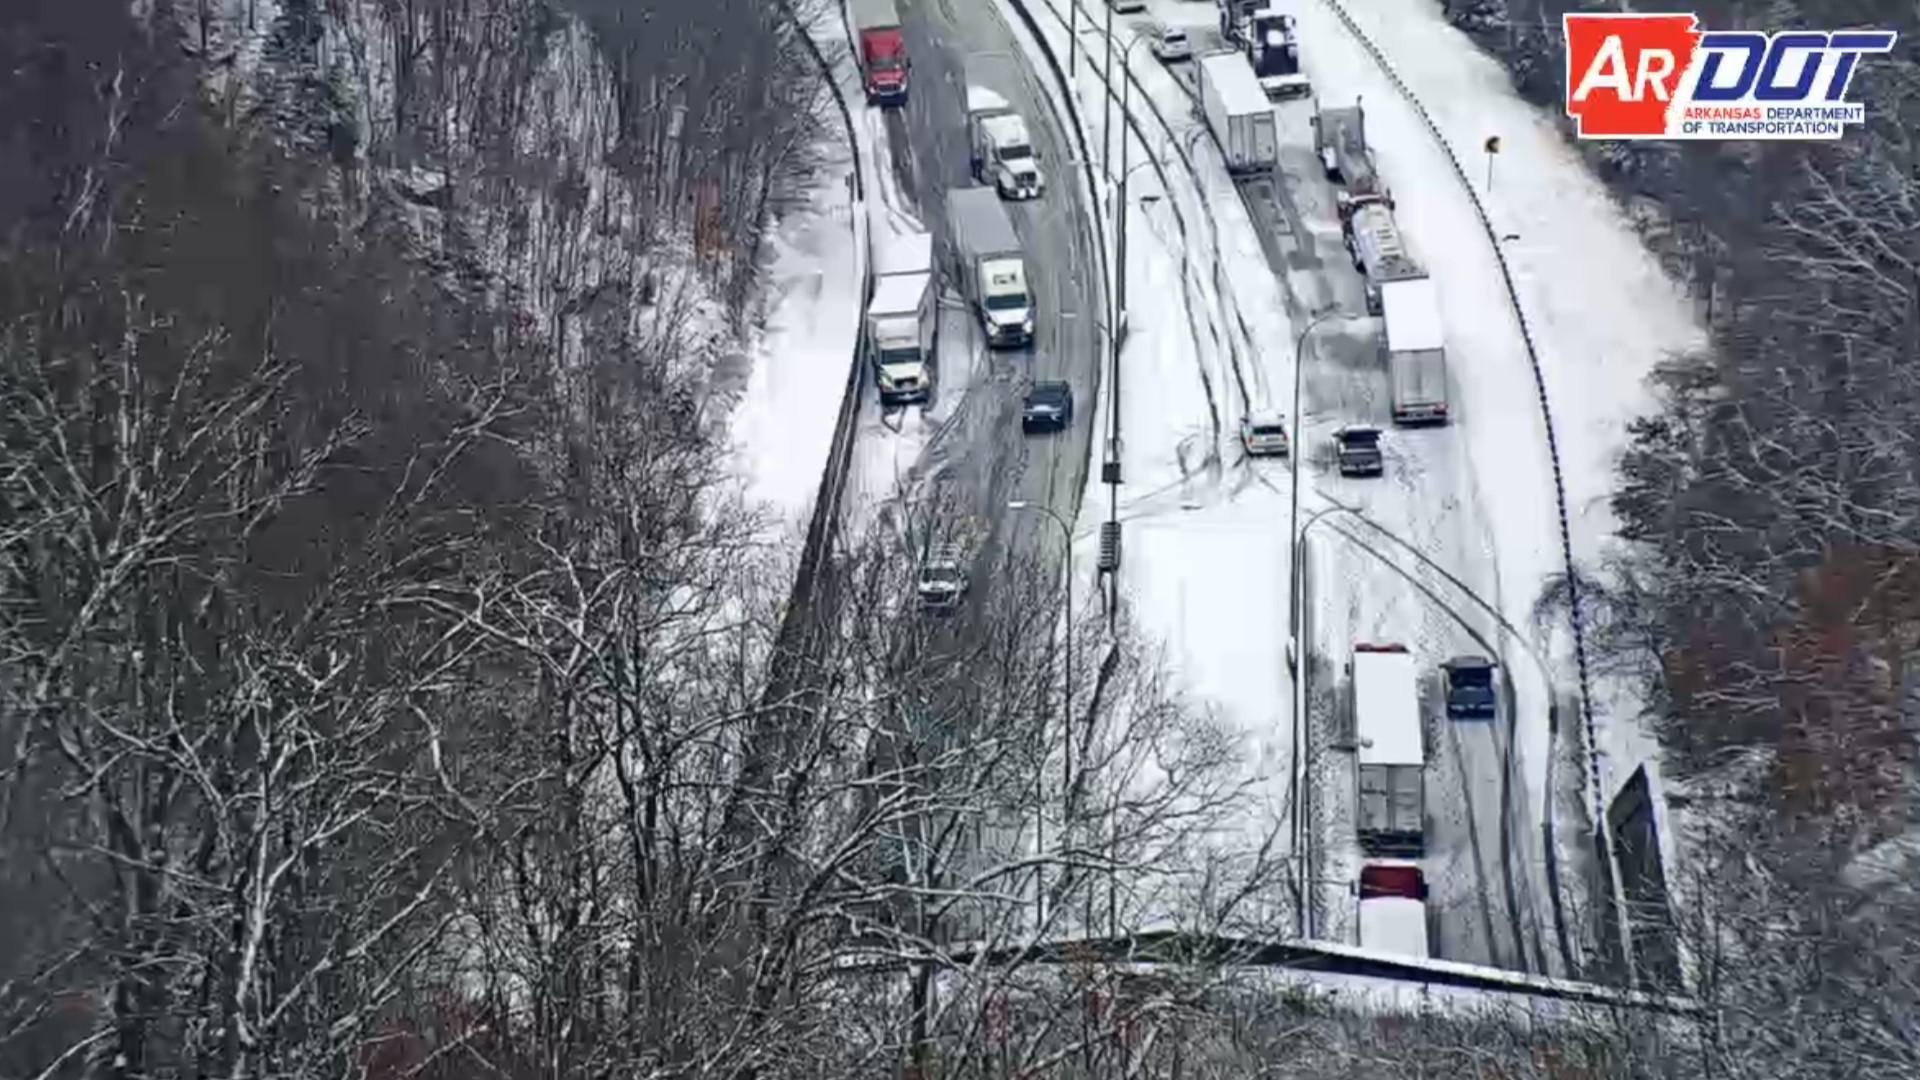 Traffic on Interstate 49 in Washington County near the Bobby Hopper Tunnel was stalled after a crash during winter weather.